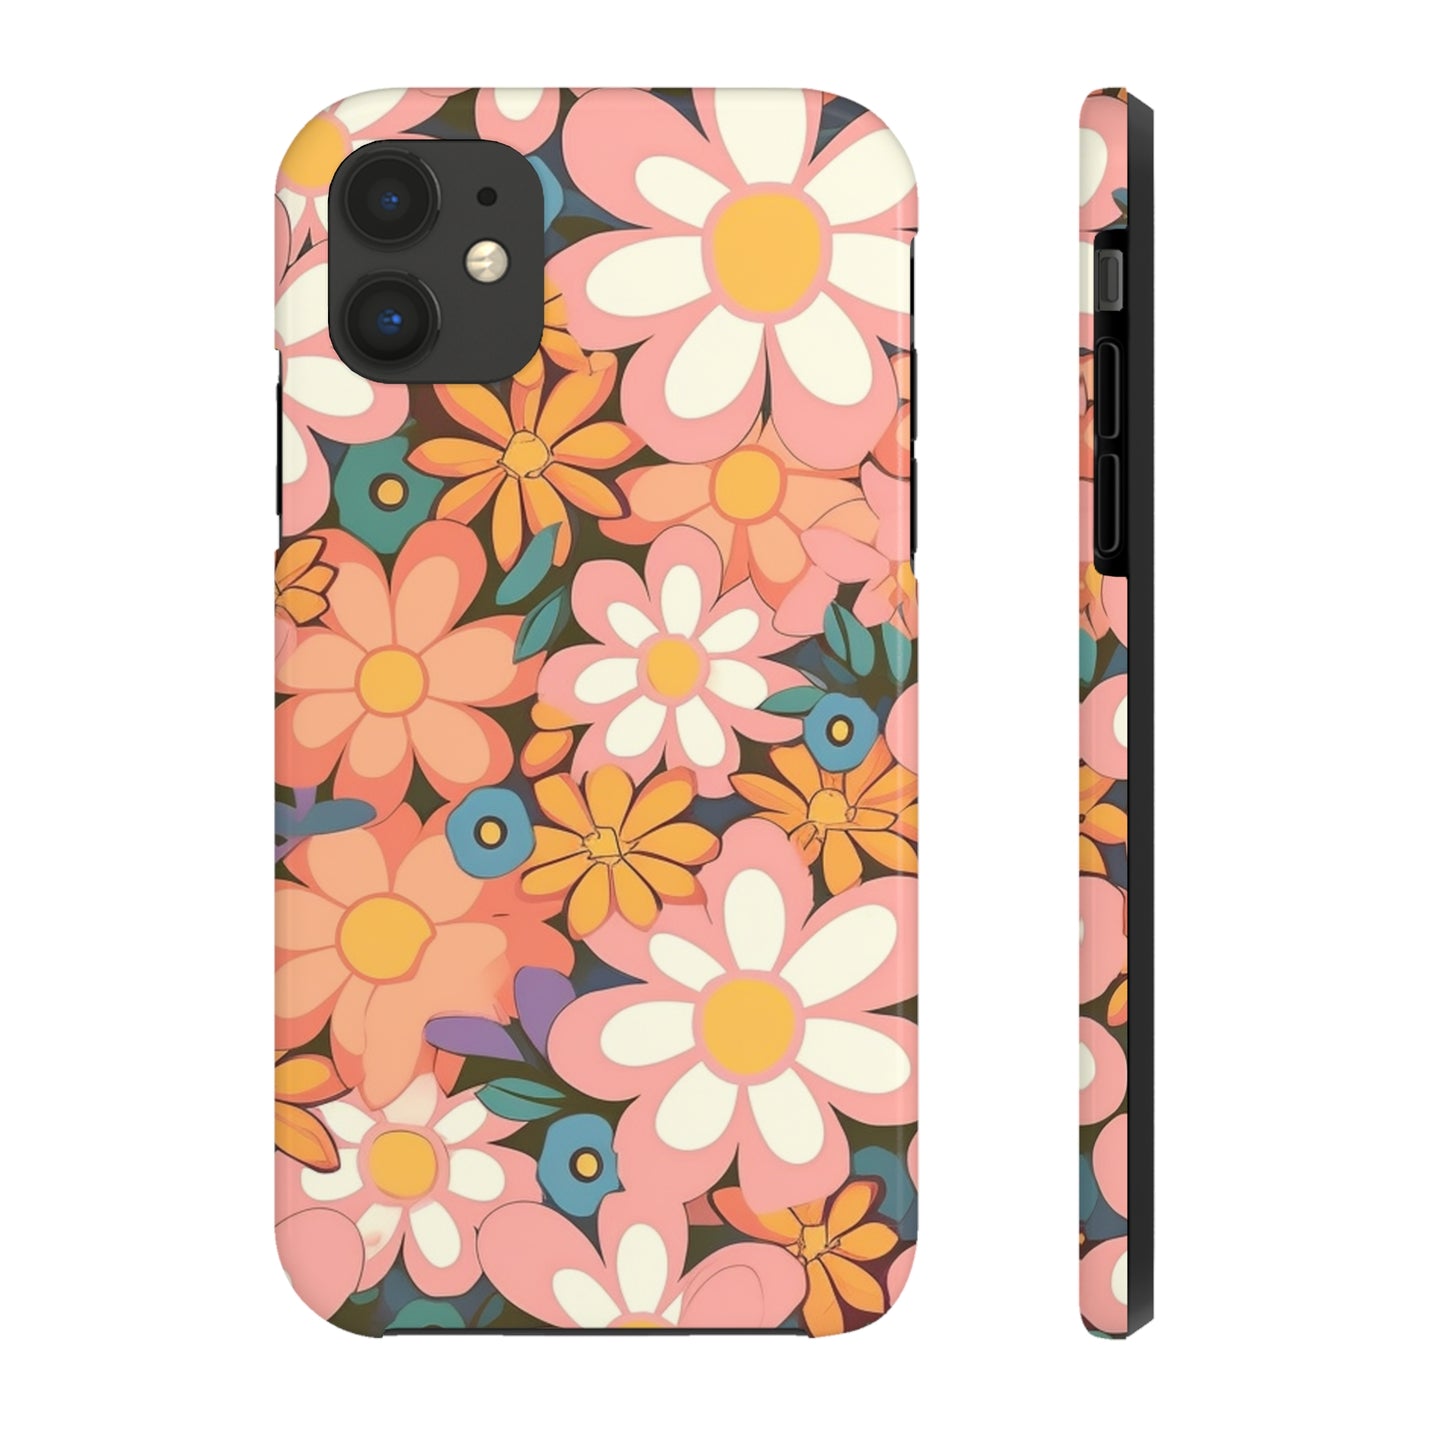 Groovy 1960s 1970s Pink & Orange Daisy Mod Floral - Tough Phone Cases